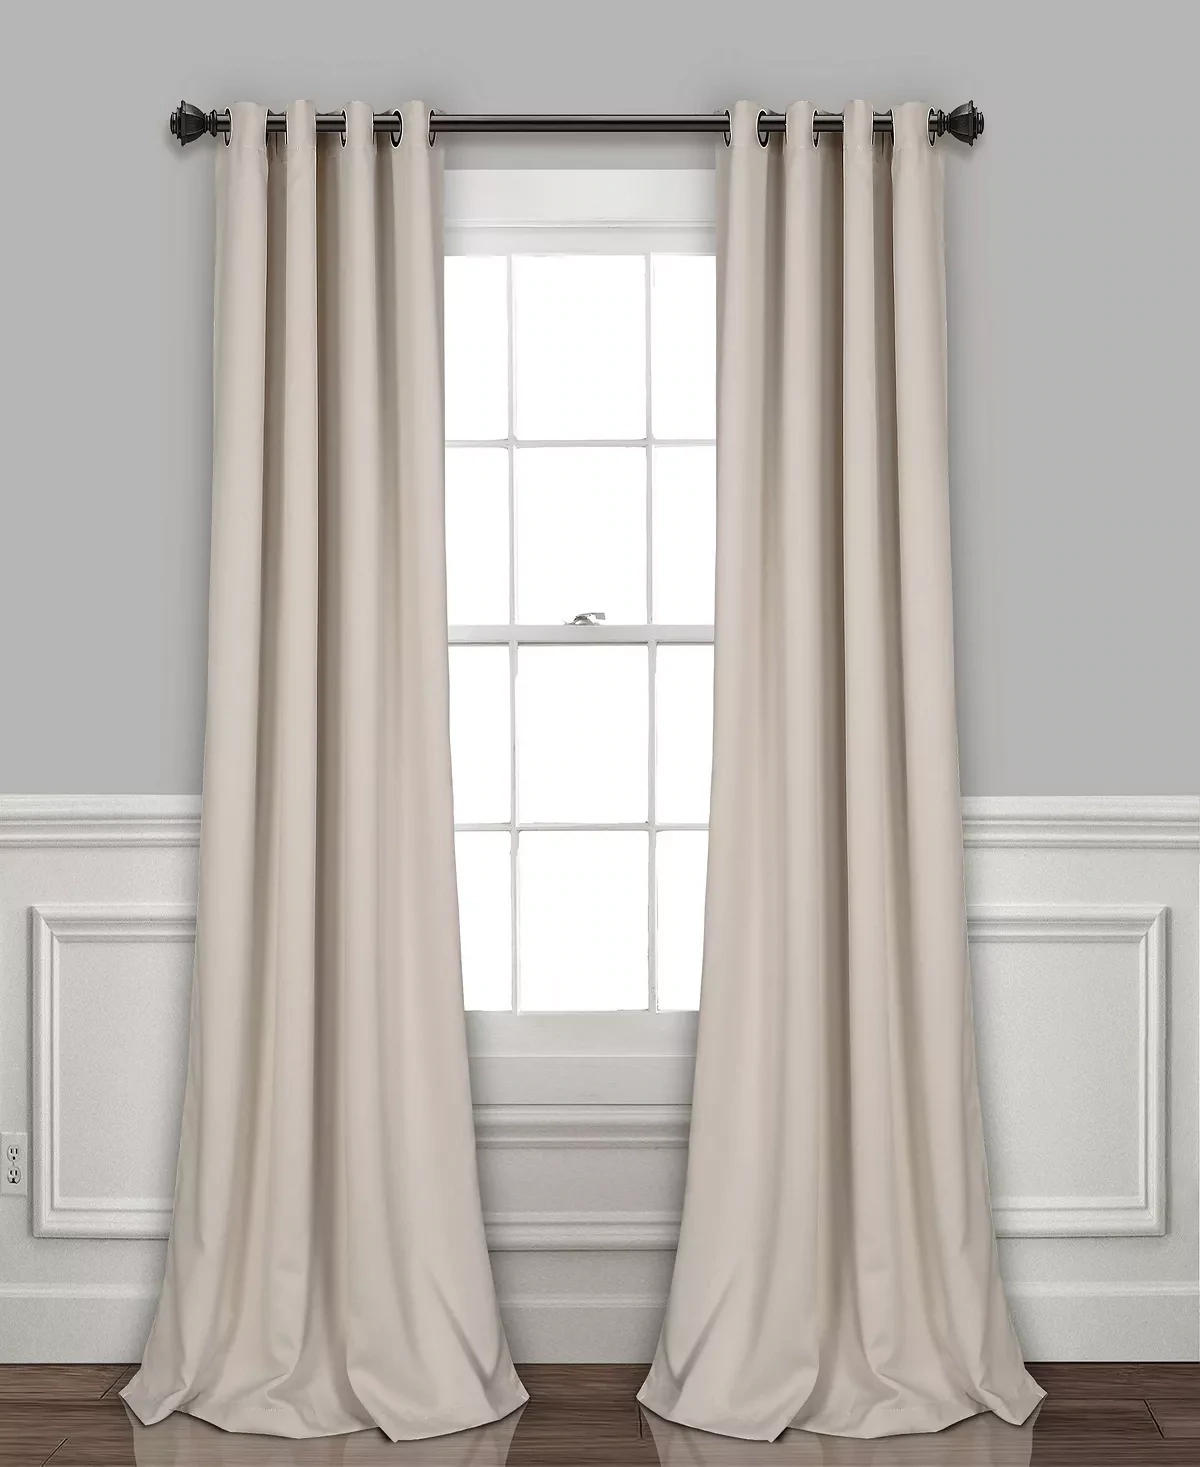 Lush Decor Wheat Polyester Solid 52 in. W X 84 in. L Grommet Blackout Curtain (Set of 2)